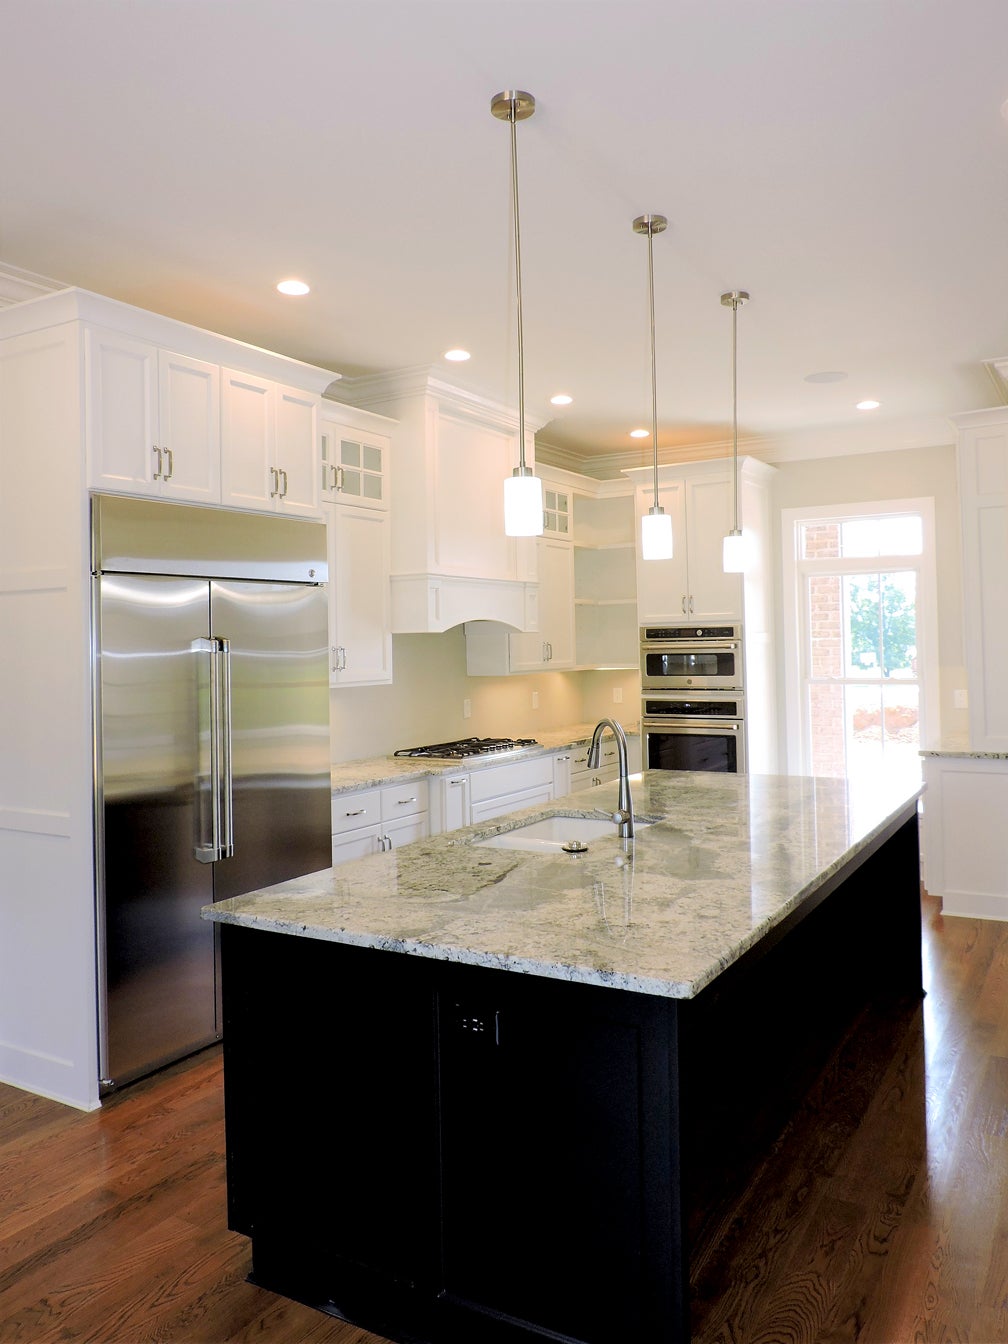 New build advantages: A beautiful kitchen with style and function